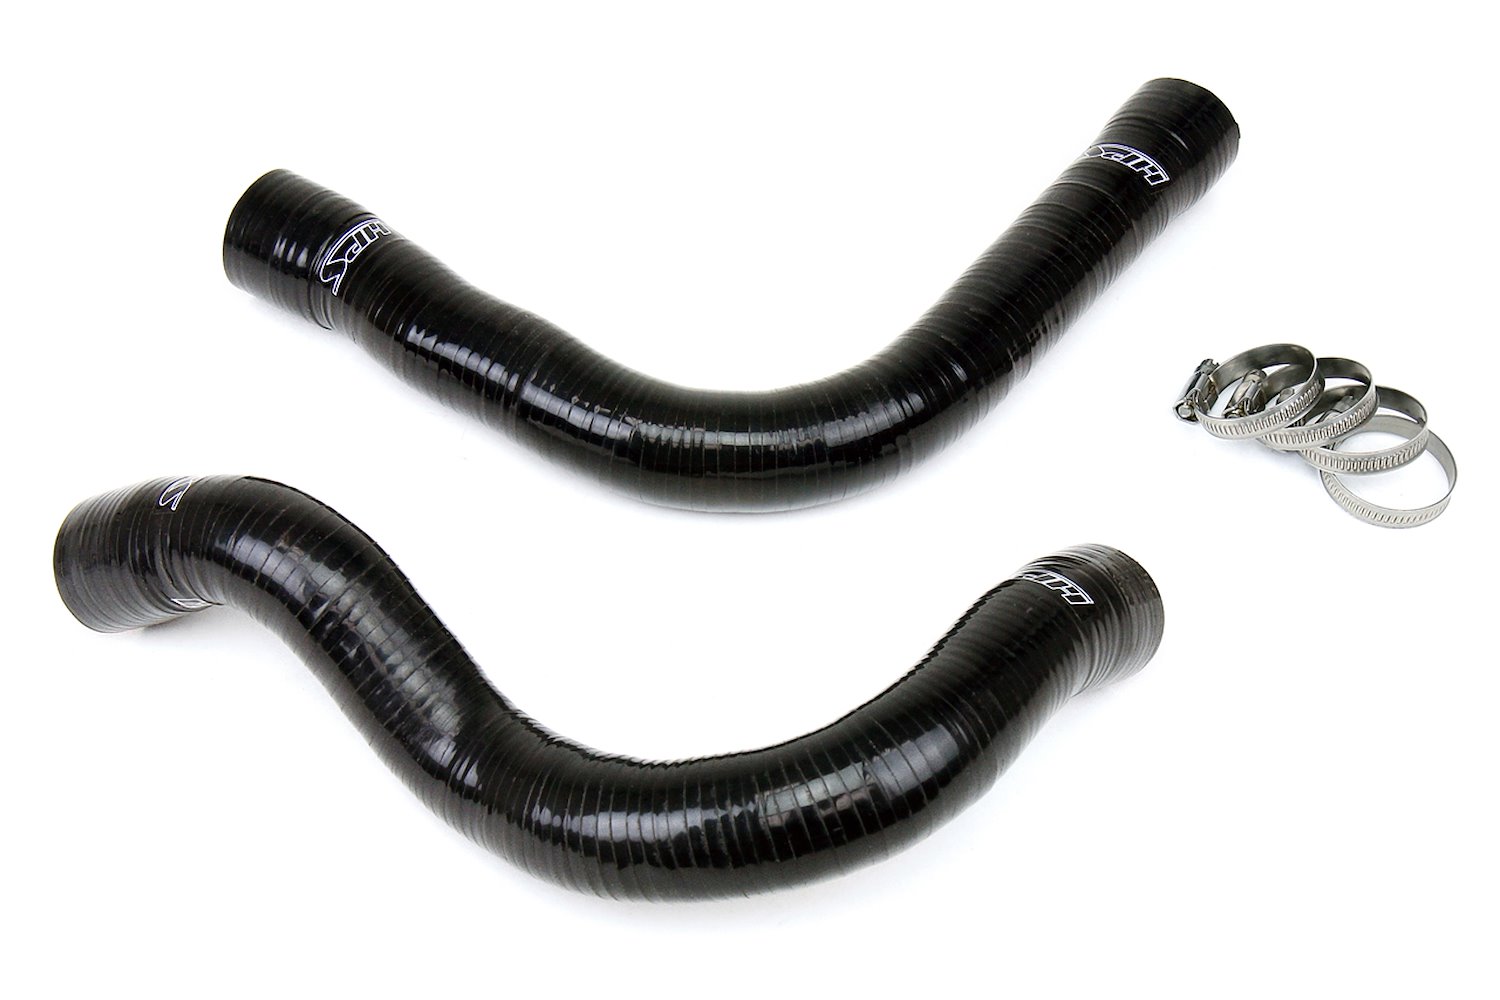 57-1007-BLK Radiator Hose Kit, High-Temp 3-Ply Reinforced Silicone, Replace OEM Rubber Radiator Coolant Hoses